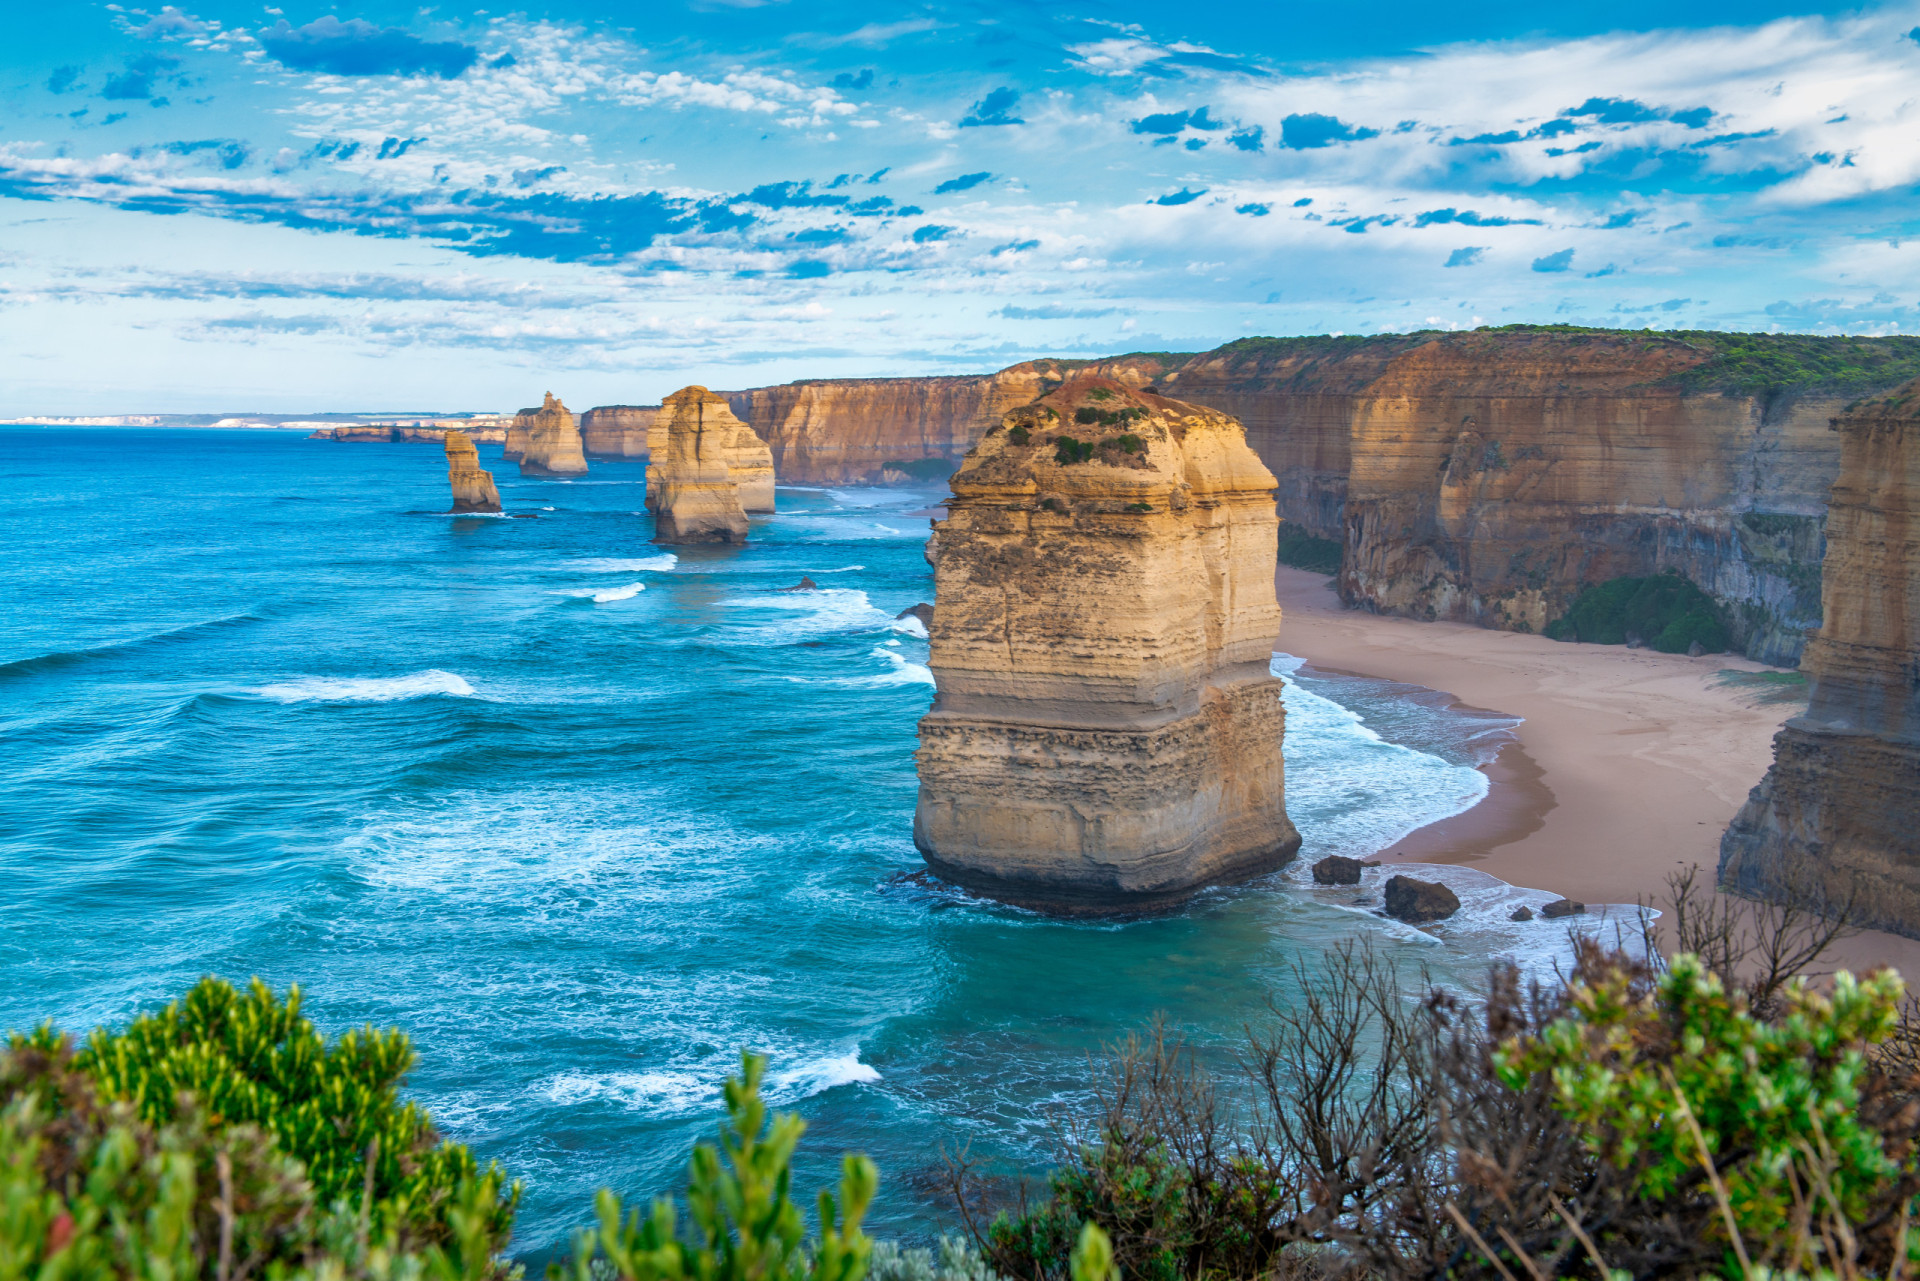 <p>The last destination on this list is the only place from the Australasian region. The Australian state of Victoria offers many sublime treats, including hot springs and beaches that overlook the Bass Strait.</p> <p>Sources: (National Geographic)</p> <p>See also: <a href="https://www.starsinsider.com/travel/306995/lesser-known-countries-you-didnt-know-existed">Lesser-known countries you didn't know existed</a></p><p>You may also like:<a href="https://www.starsinsider.com/n/441037?utm_source=msn.com&utm_medium=display&utm_campaign=referral_description&utm_content=701834en-us"> Rare vintage photos of celebrities partying</a></p>